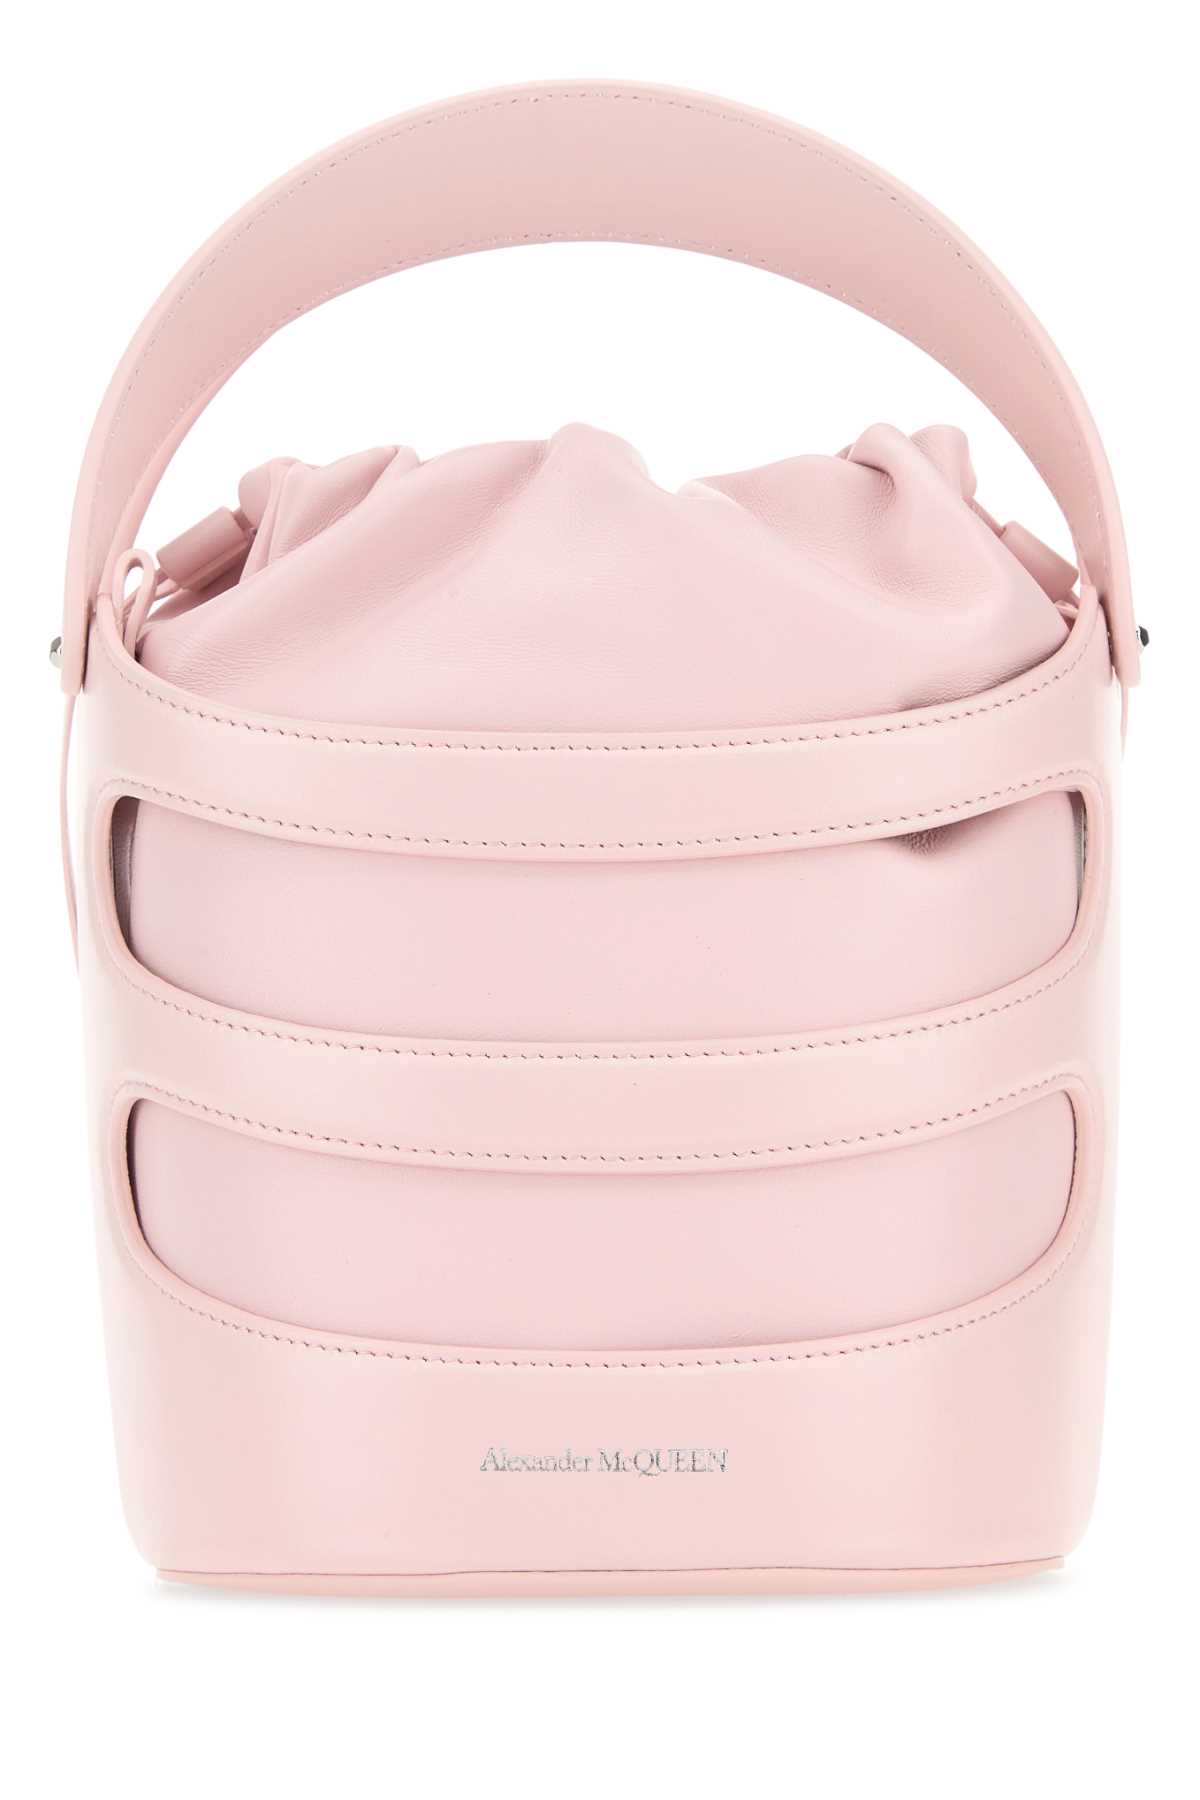 Alexander McQueen Pastel Pink Leather The Rise Bucket Bag